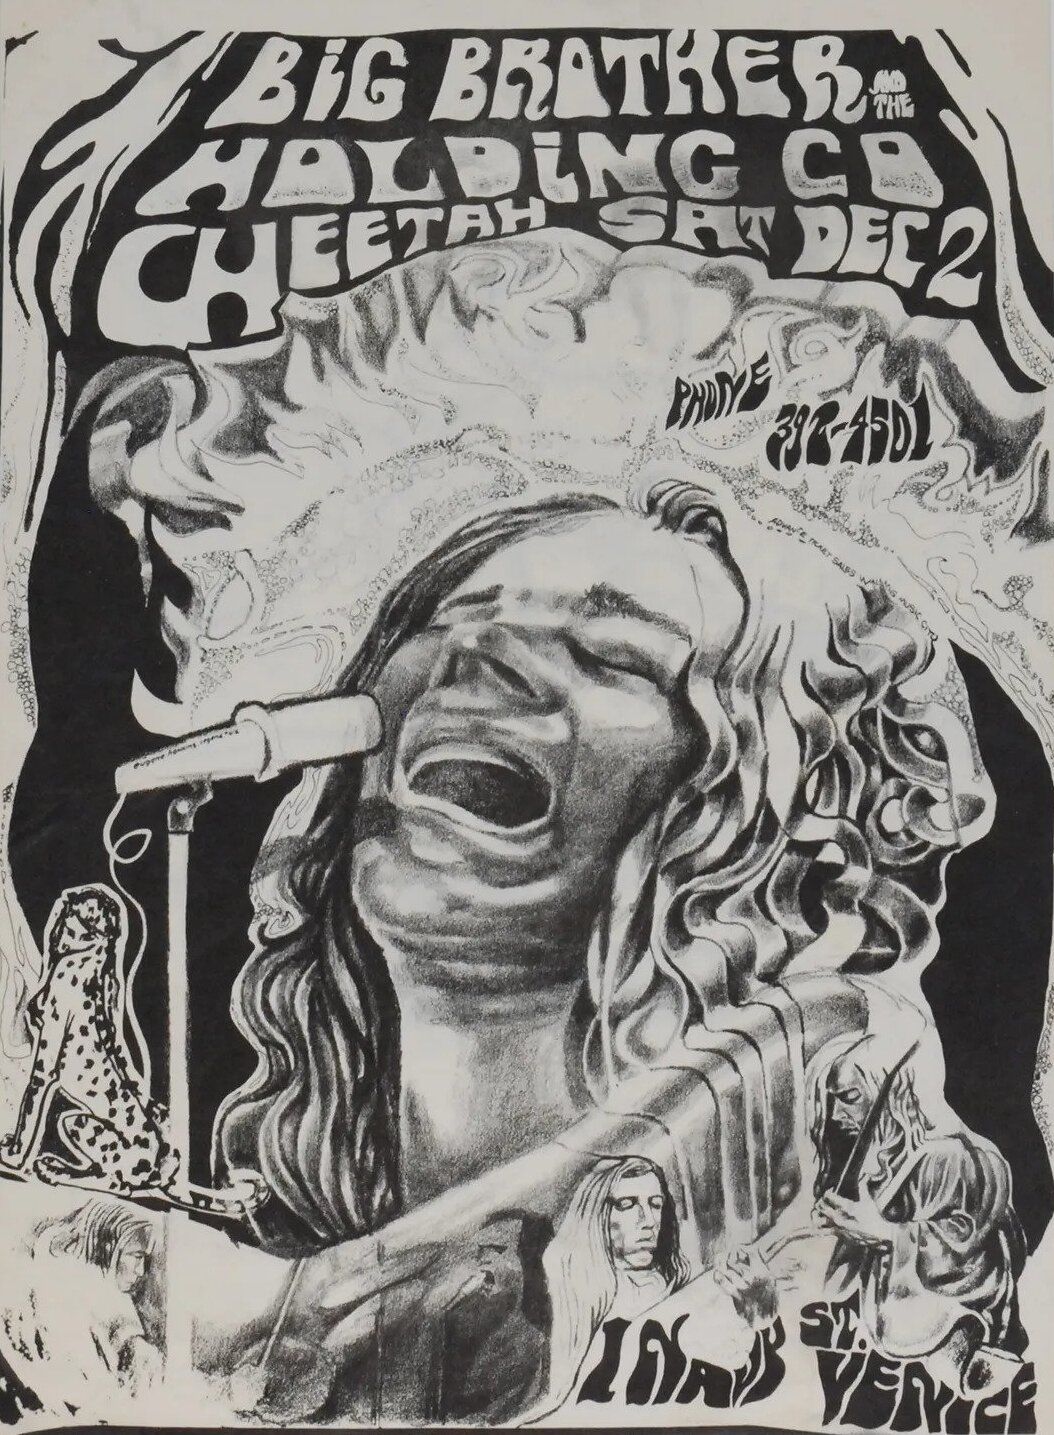 Big brother & the Holding Company The Cheetah Club 1967 Concert Poster